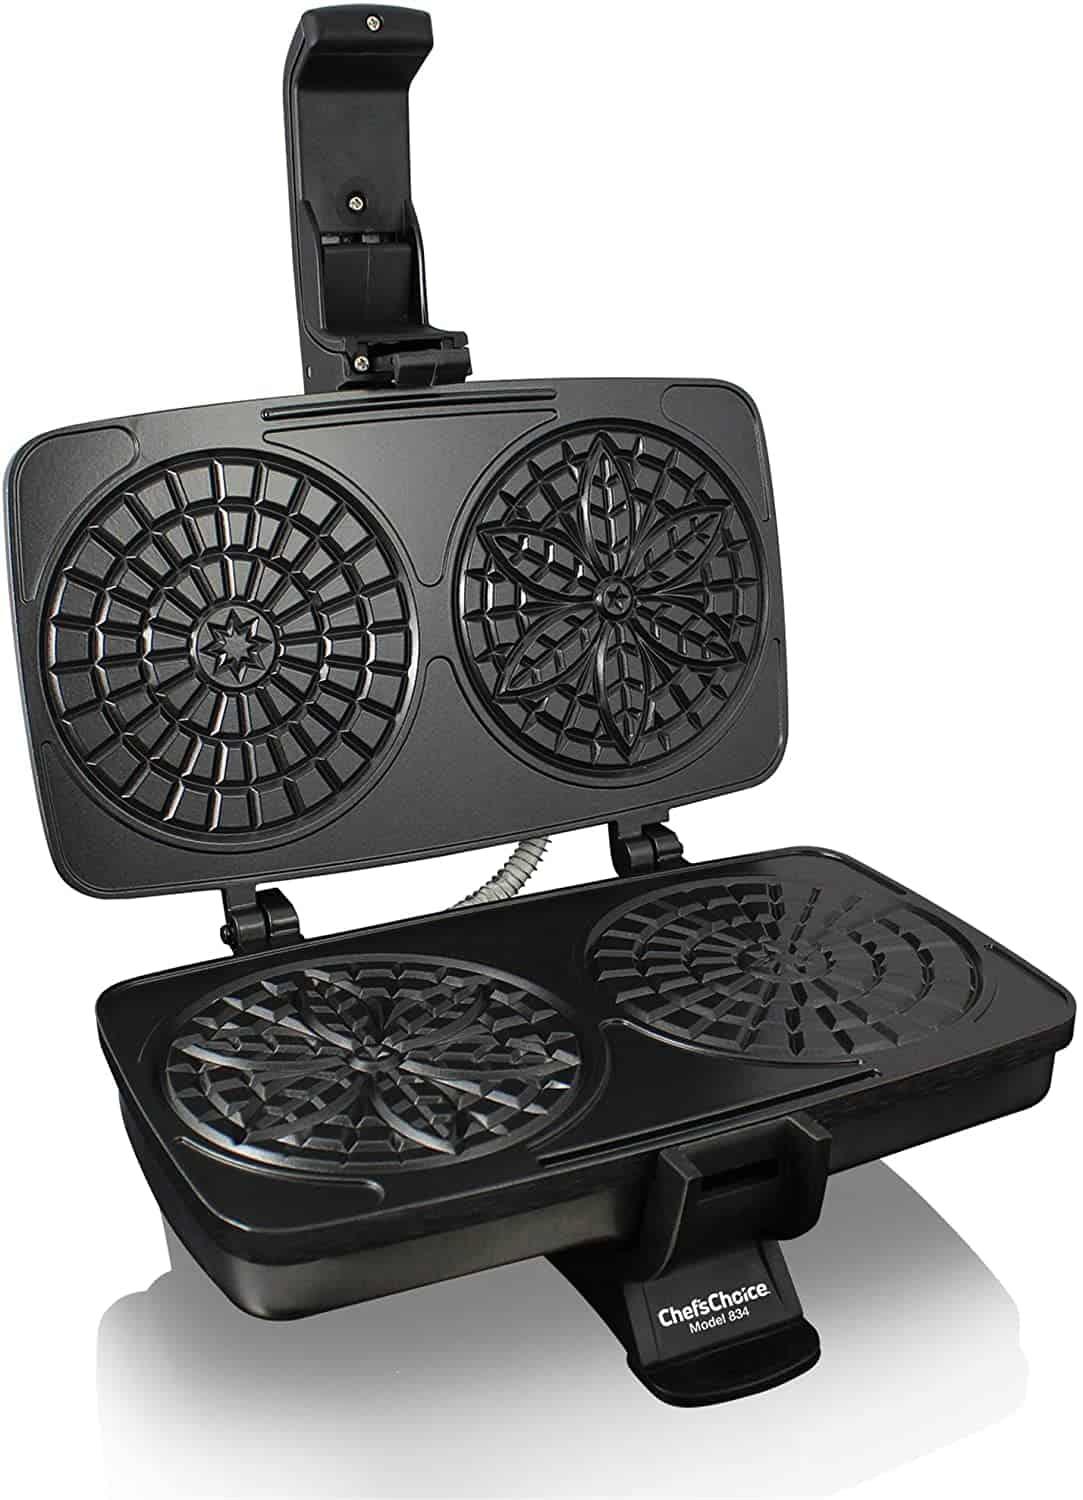 Chef’s Choice 834 Pizzellepro Toscano Nonstick Pizzelle Maker